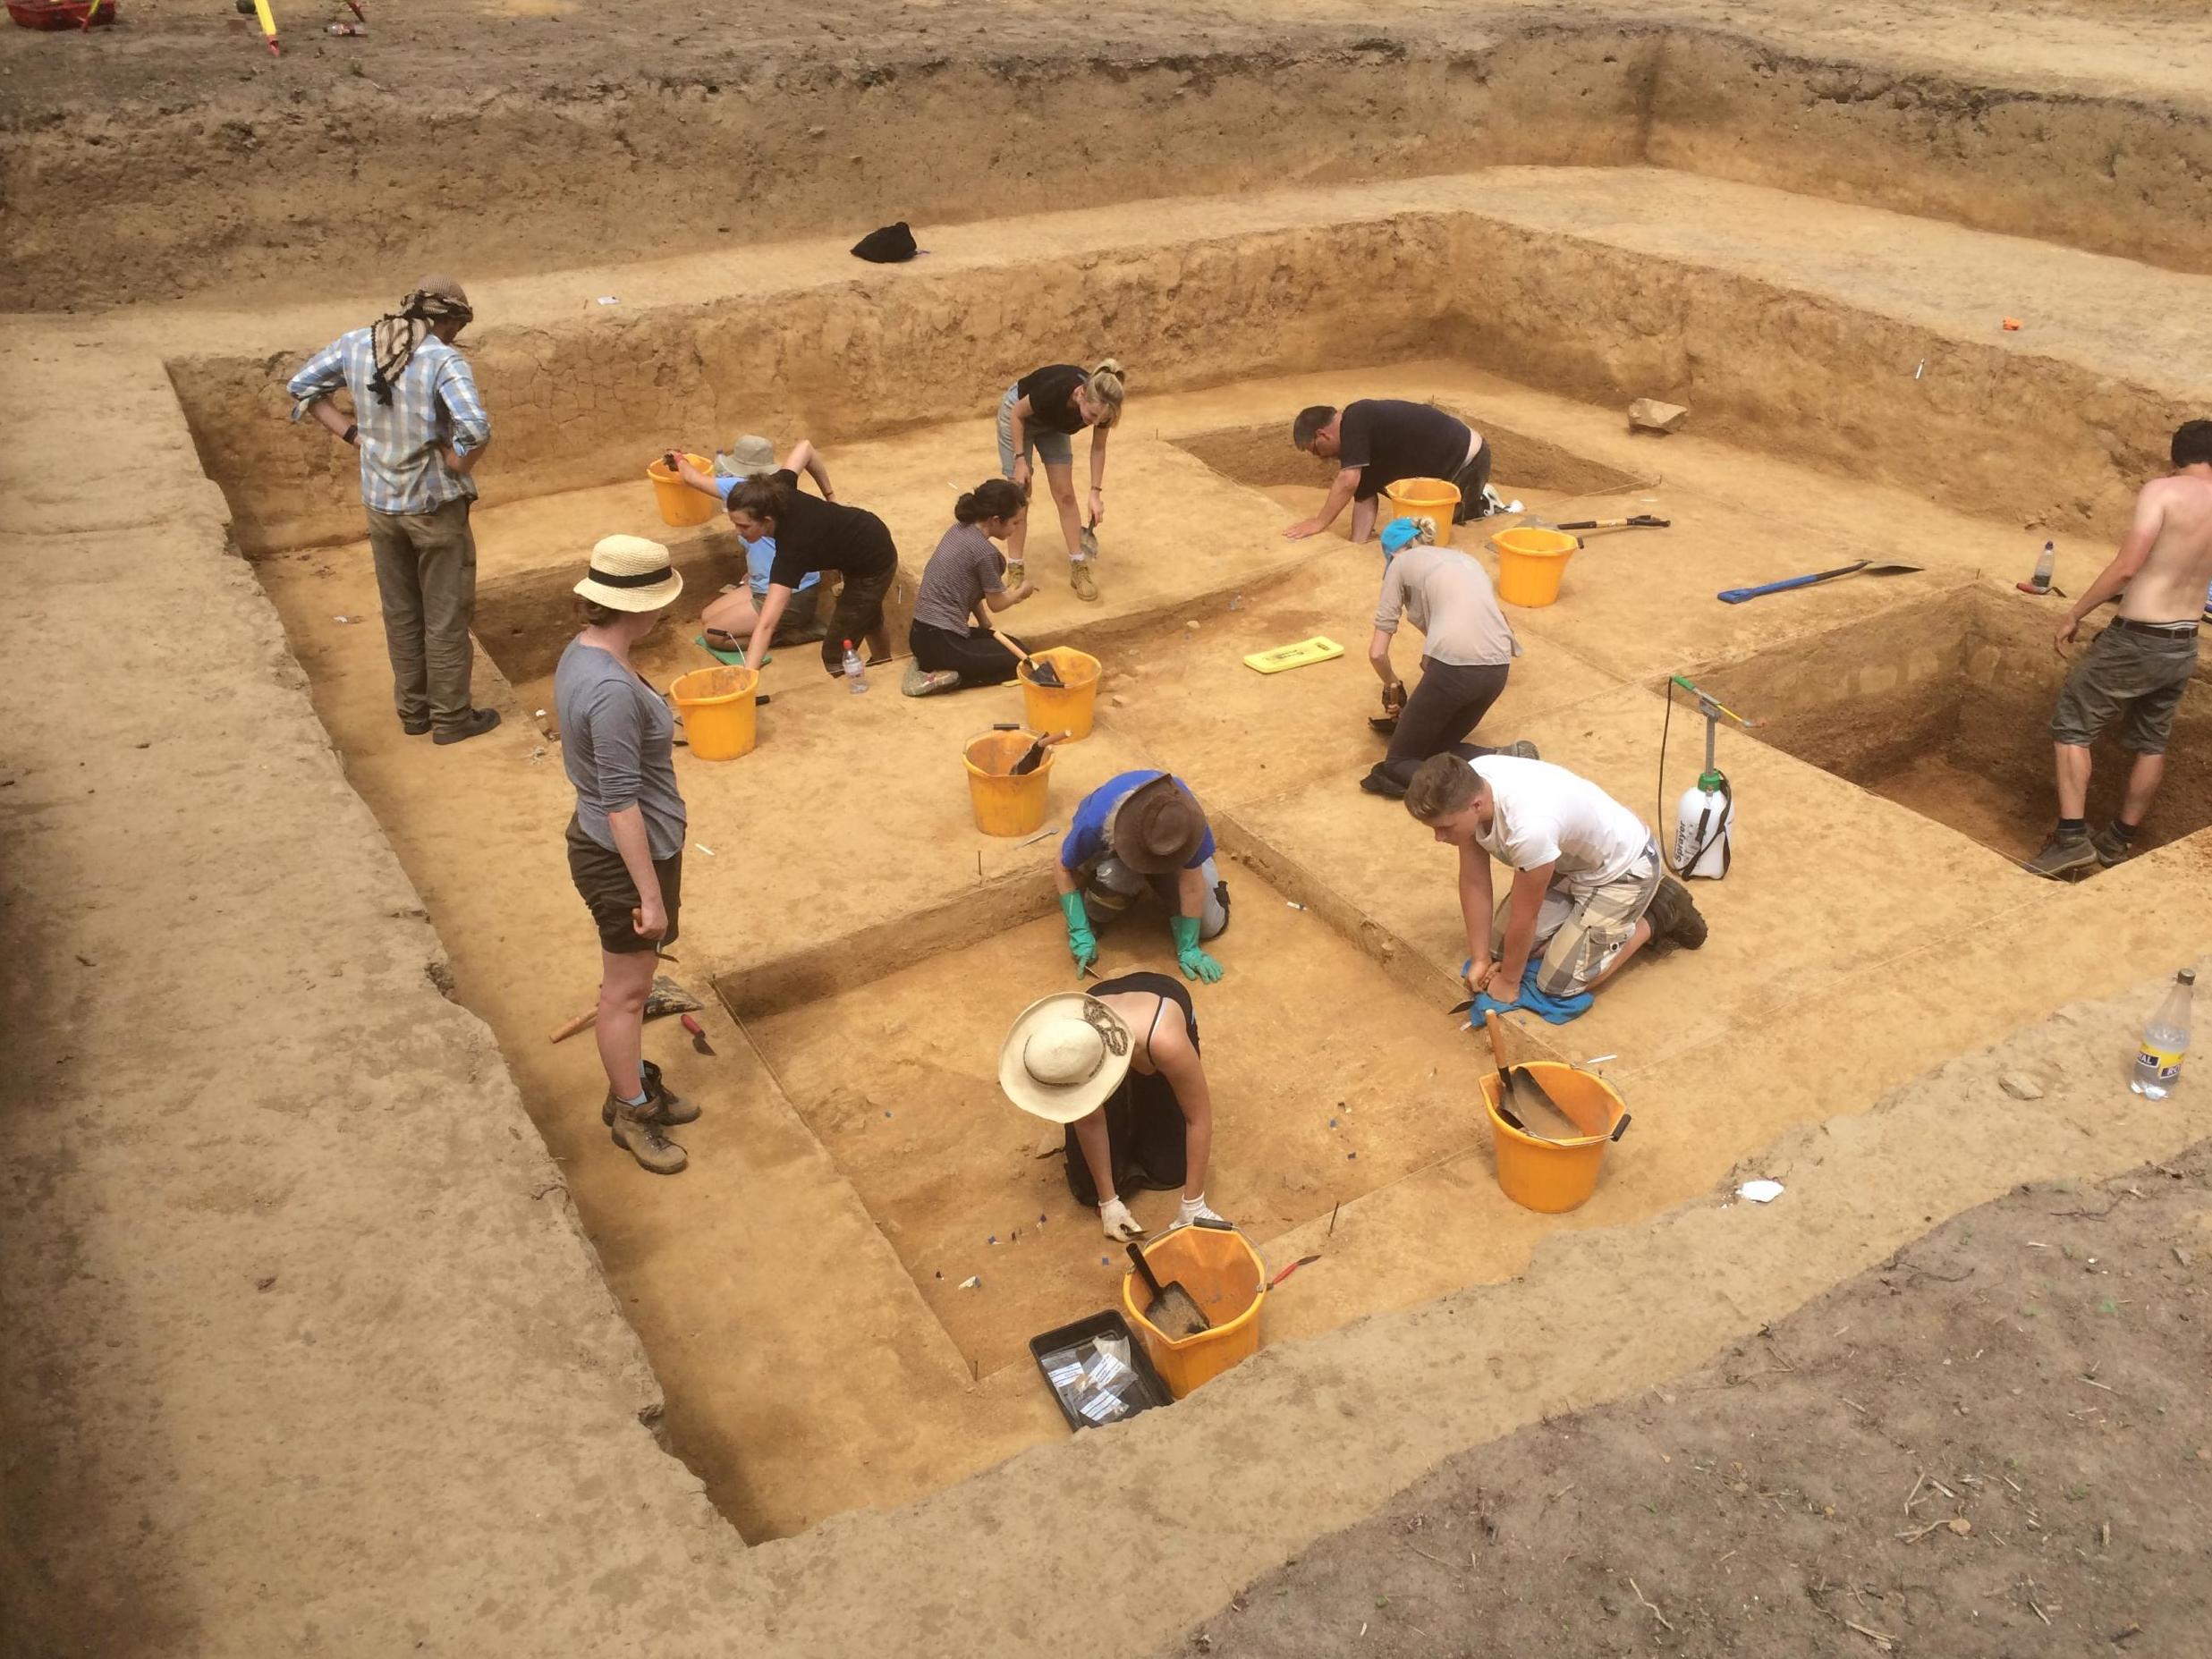 Scientists excavate a 15,000 year old Jersey site where the works were found